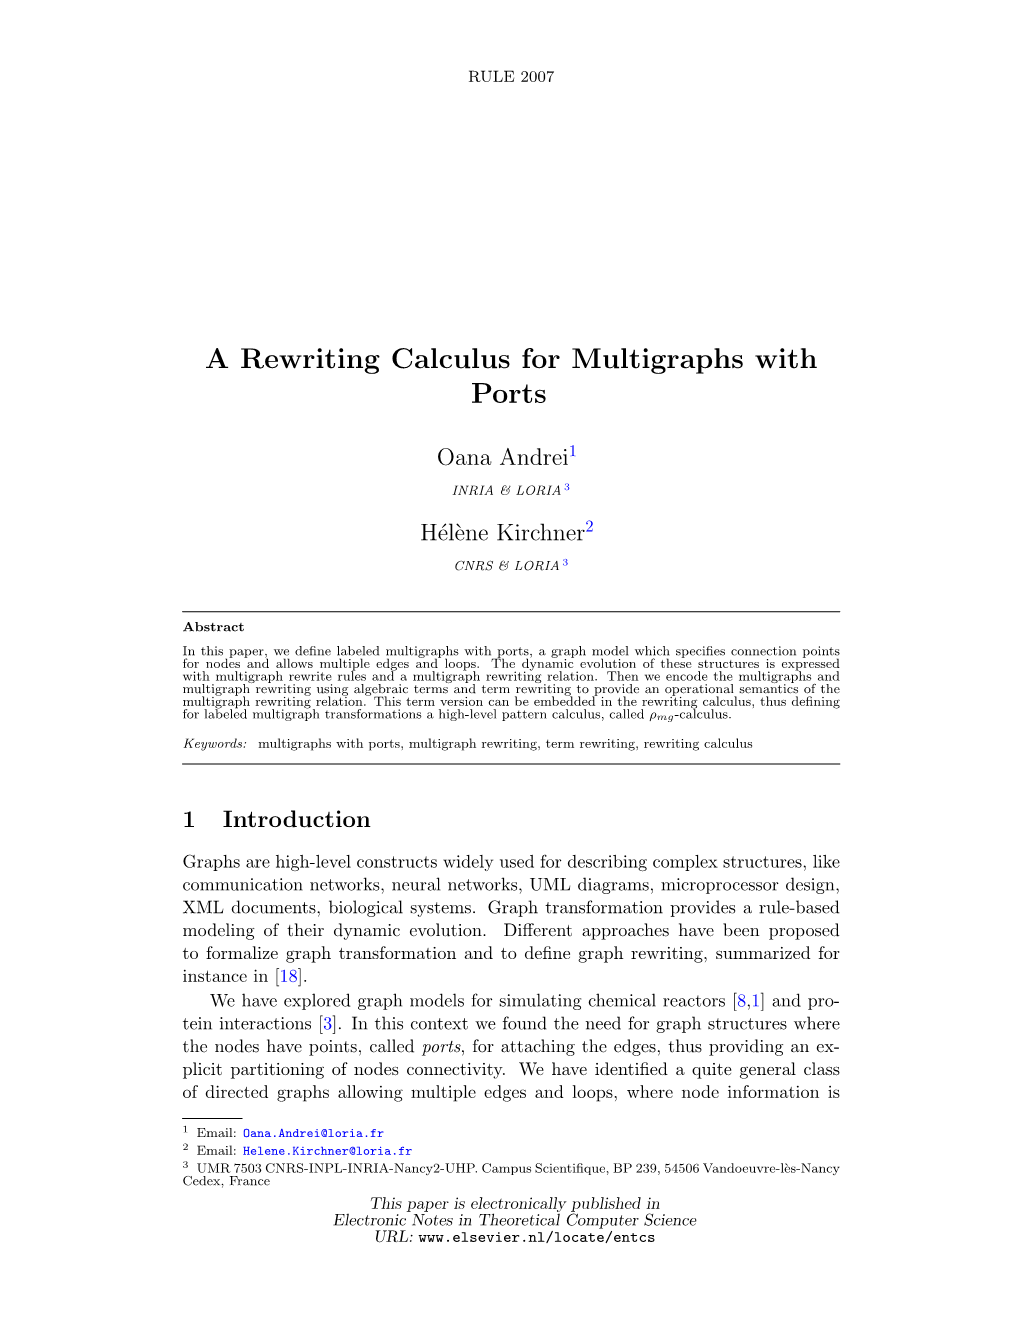 A Rewriting Calculus for Multigraphs with Ports